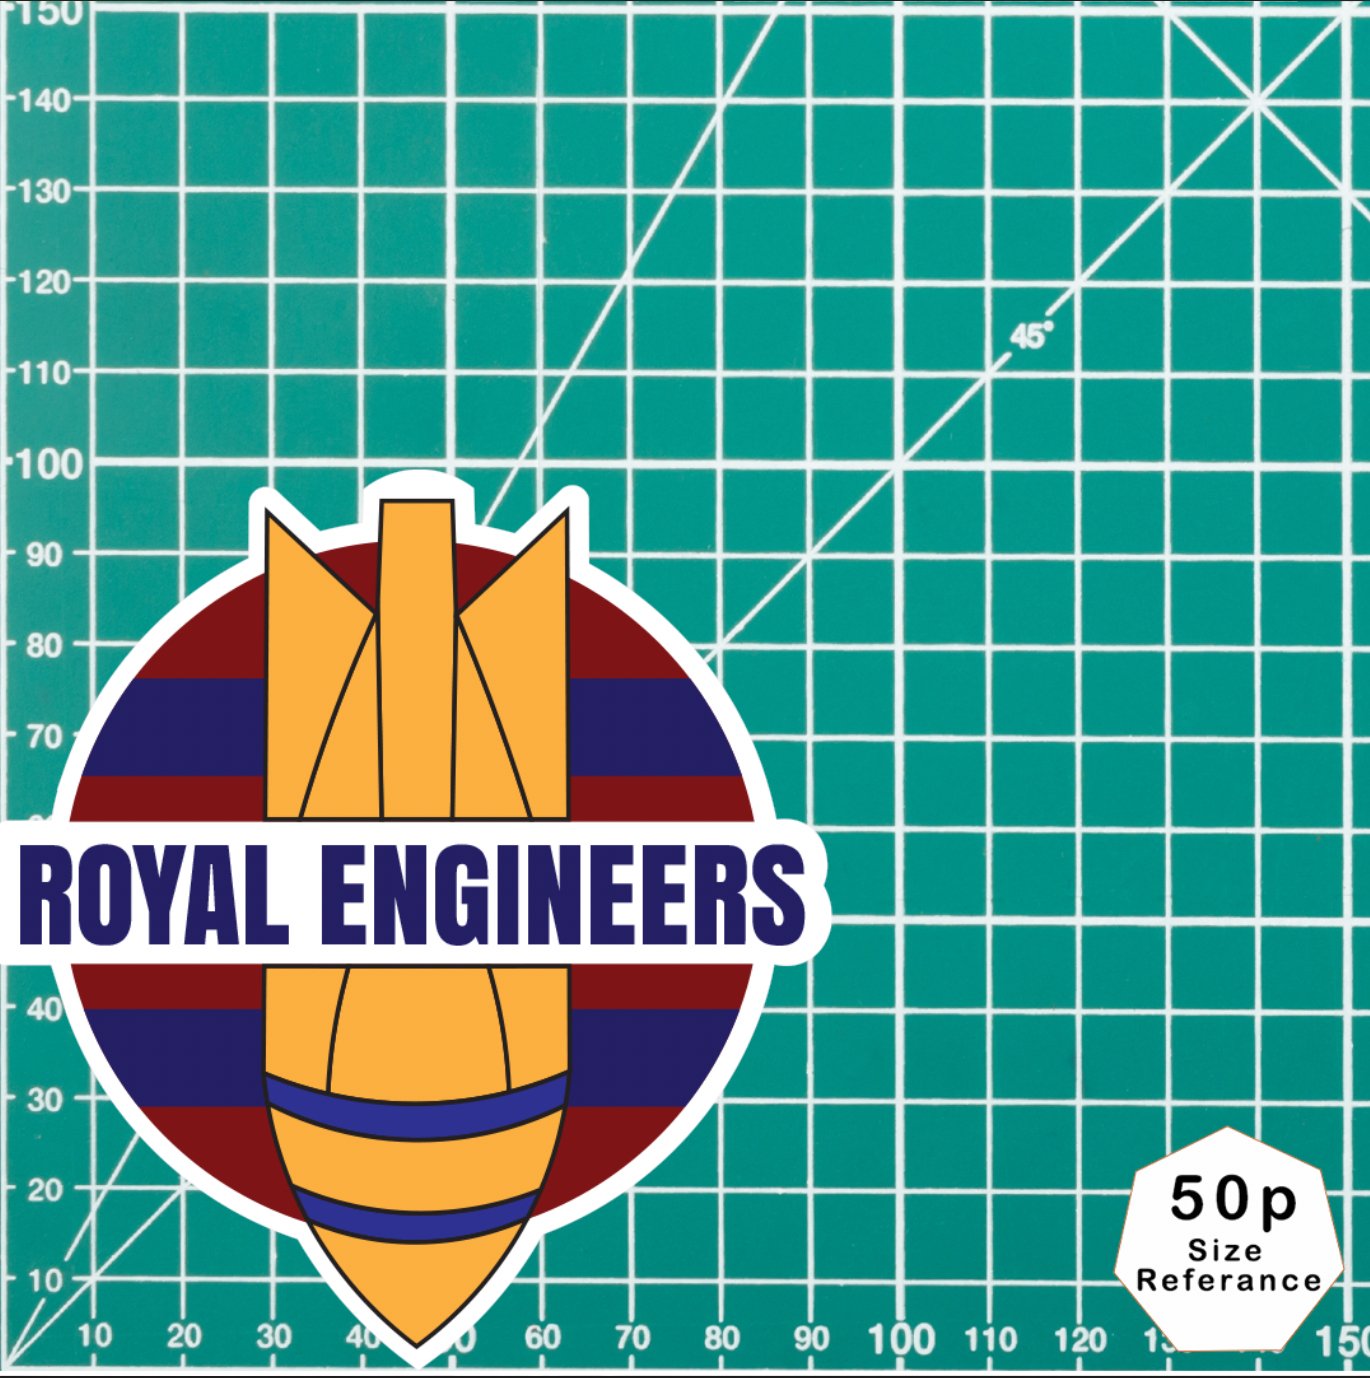 Royal Engineers EOD High-Quality Vinyl Sticker - 100mm - Red Plume